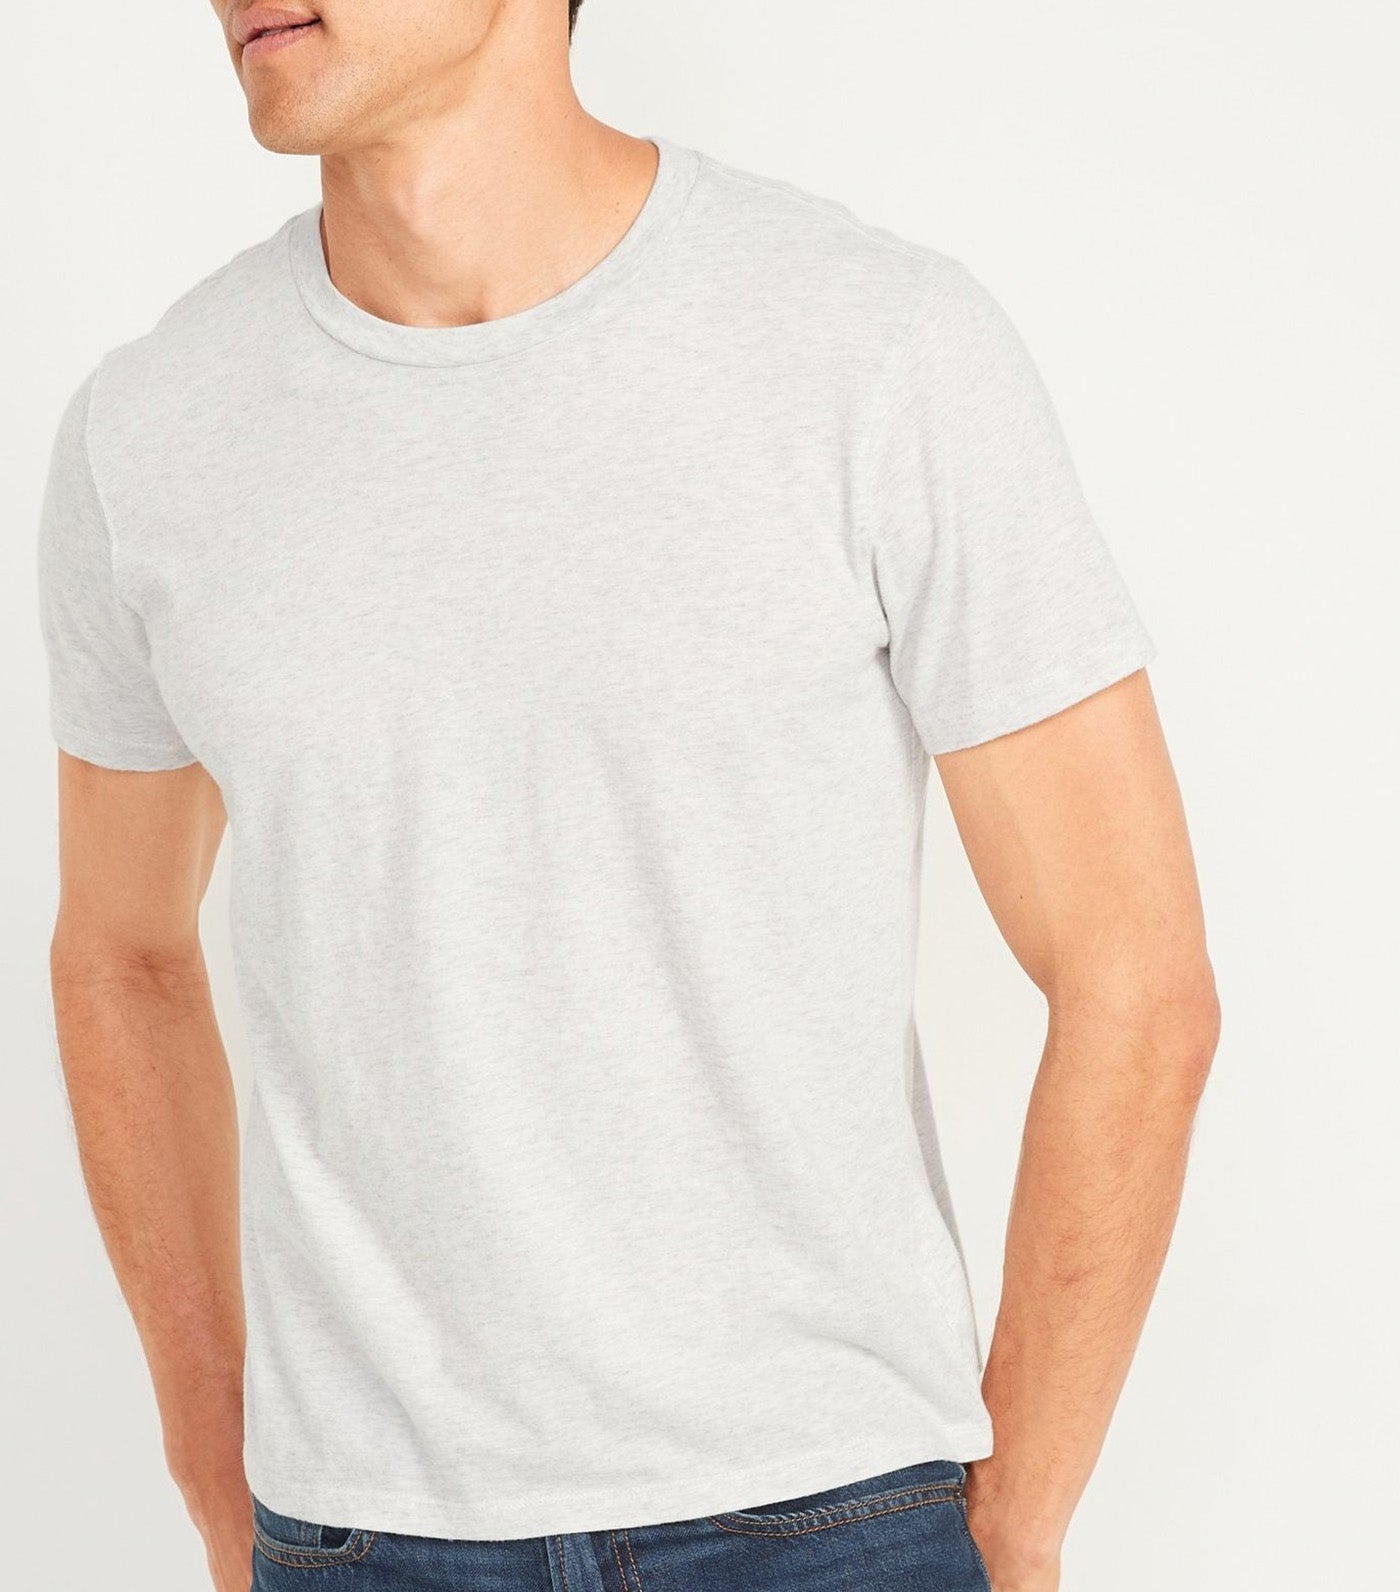 Soft-Washed Crew-Neck T-Shirt for Men Oatmeal Heather